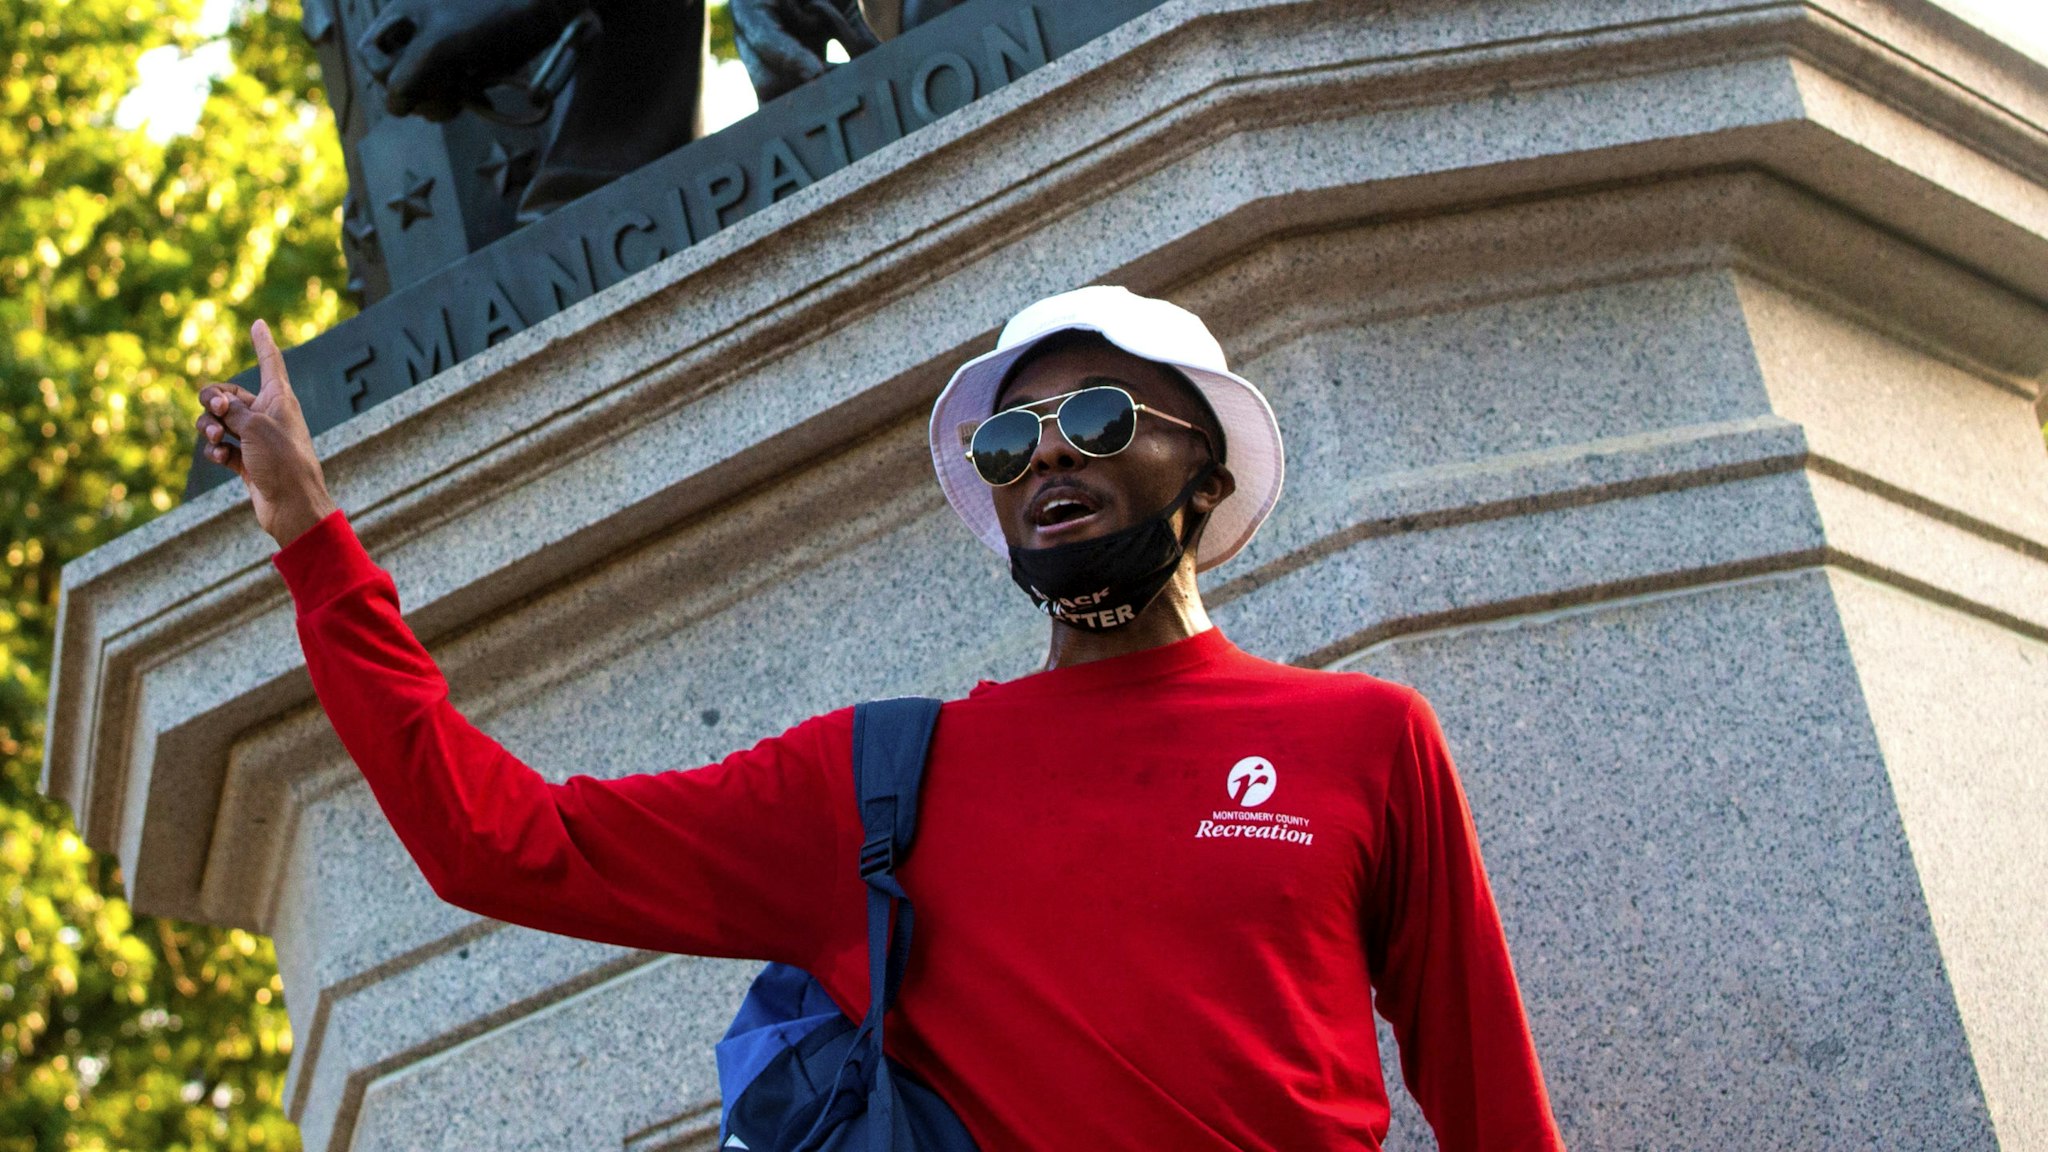 A protest leader speaks during a rally in support for the removal of the Emancipation Statue at Lincoln Park in Washington, DC on June 23, 2020. - As the wave of anti-racism protests rocking the United States brings down monuments to figures linked to the country's history of slavery, the spotlight is shifting to other prominent people long considered untouchable.